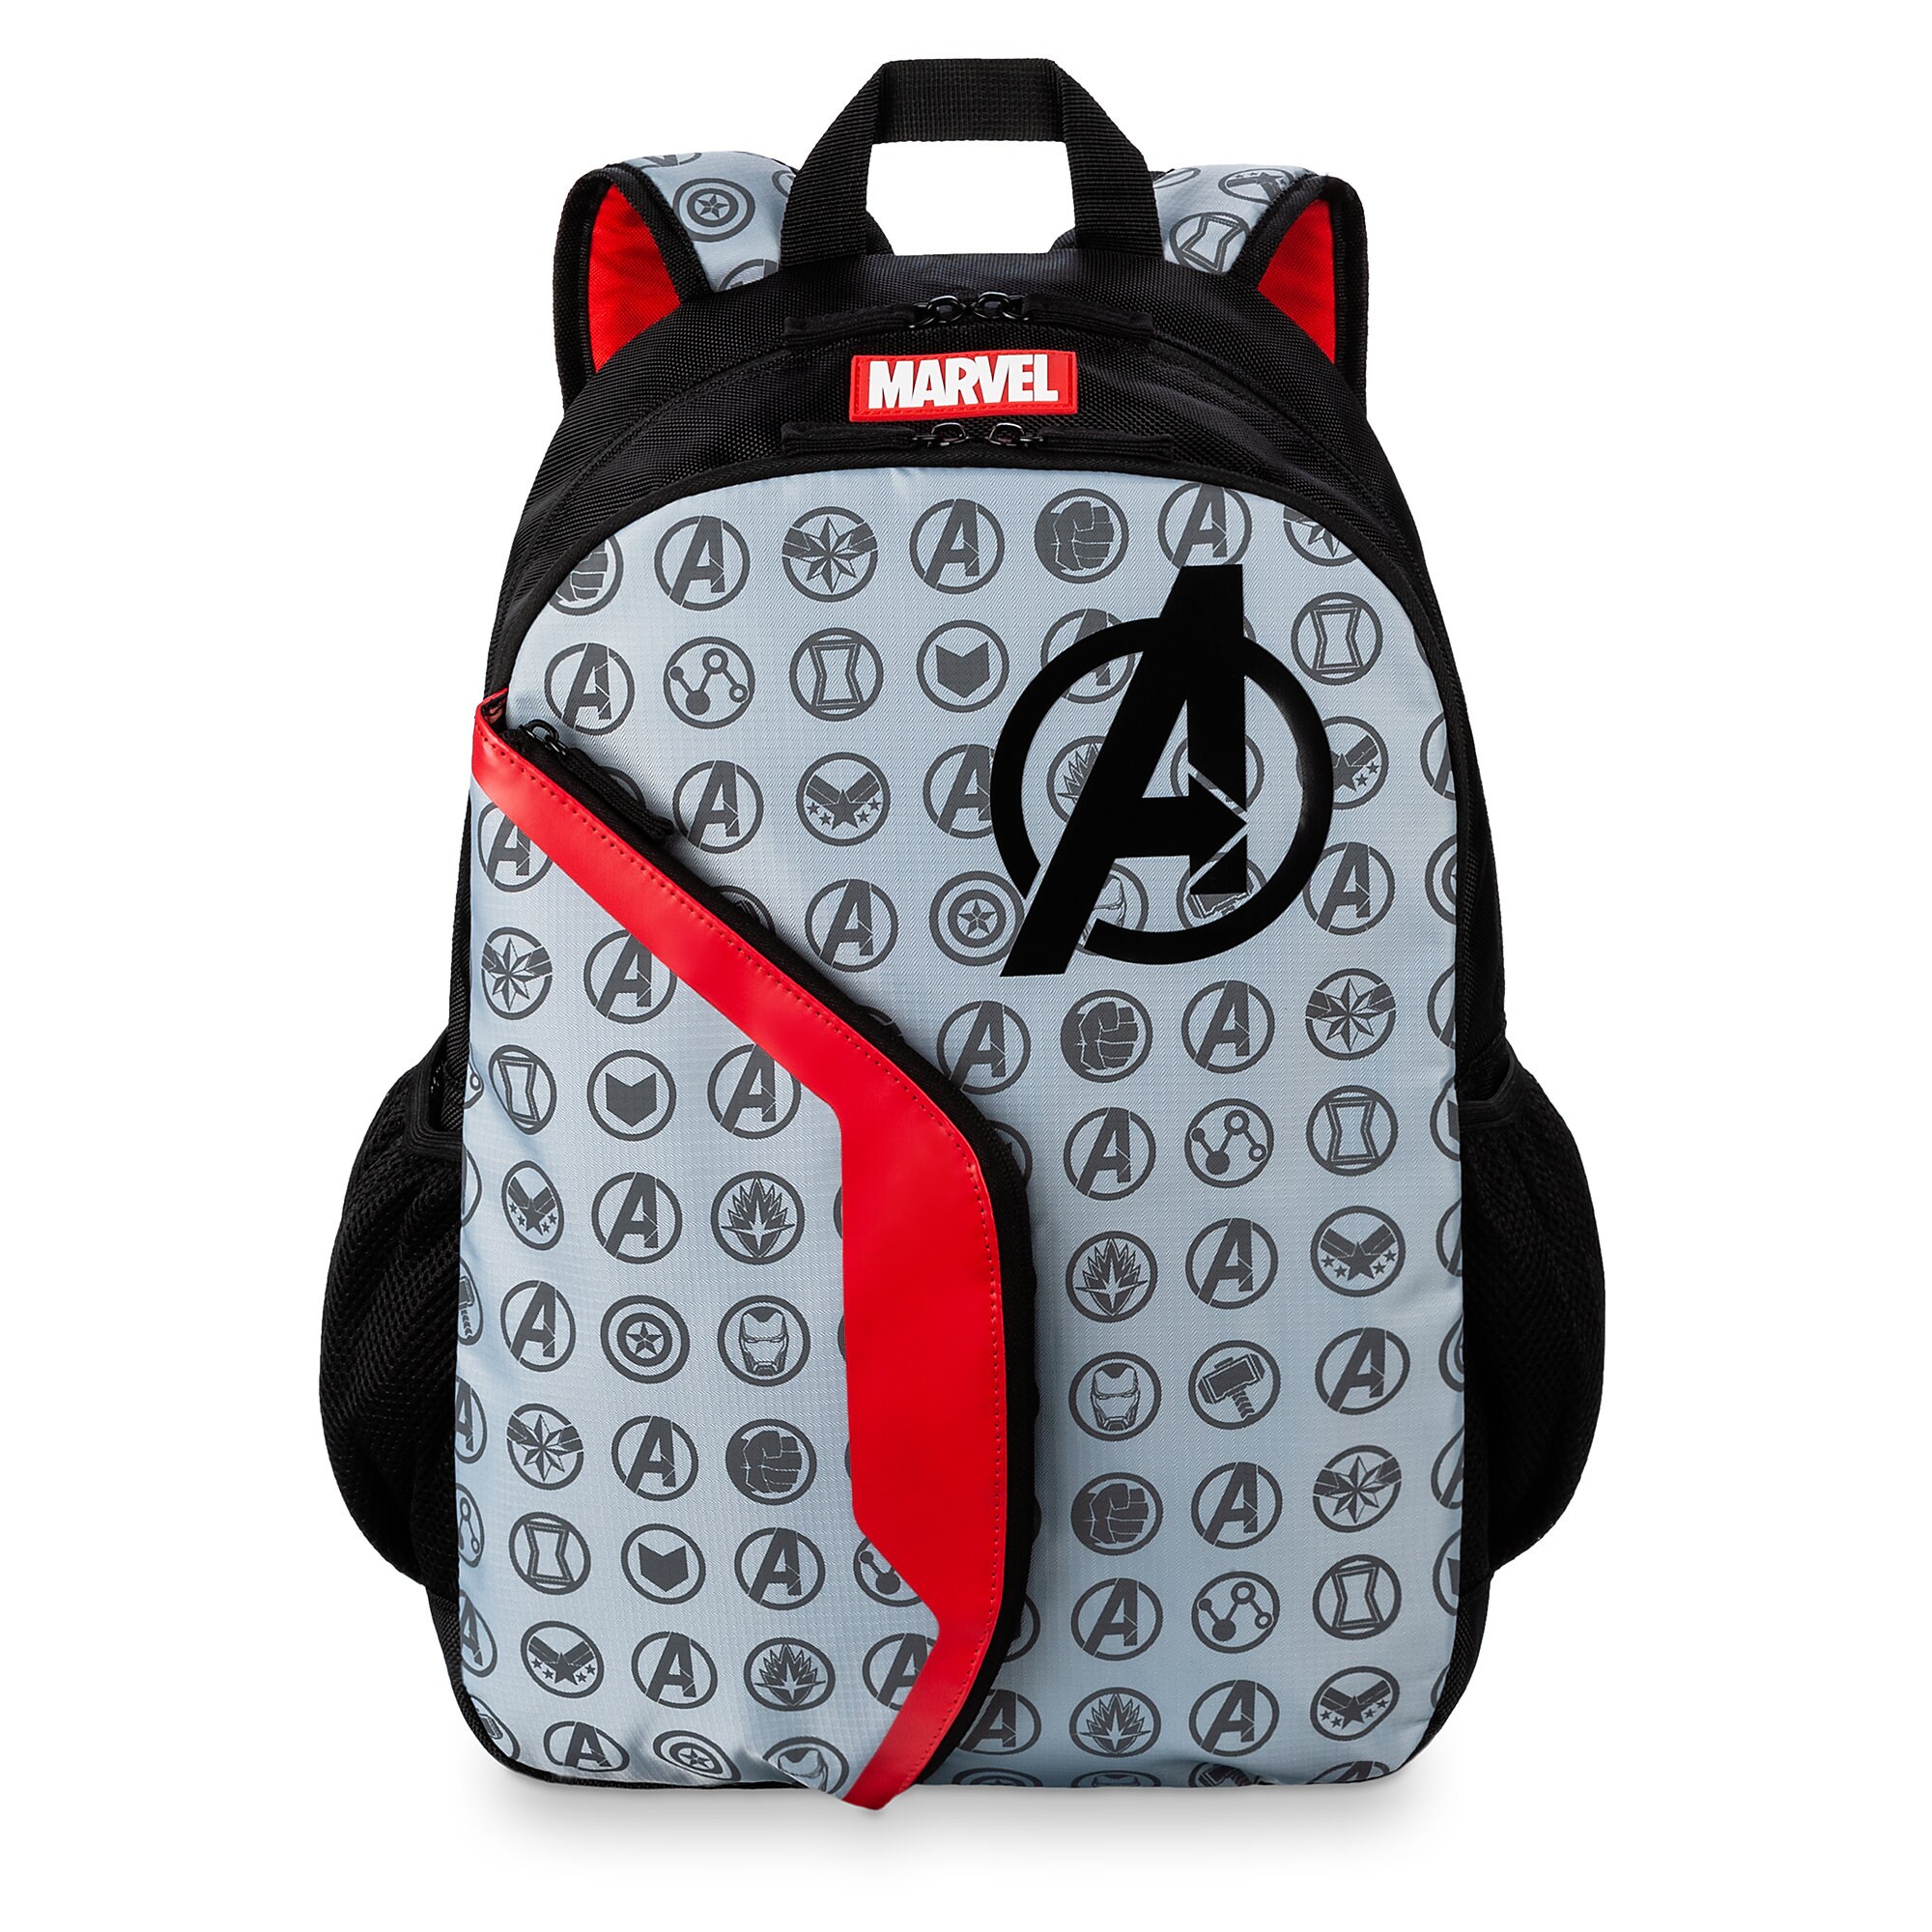 Marvel Avengers Backpack now available Dis Merchandise News